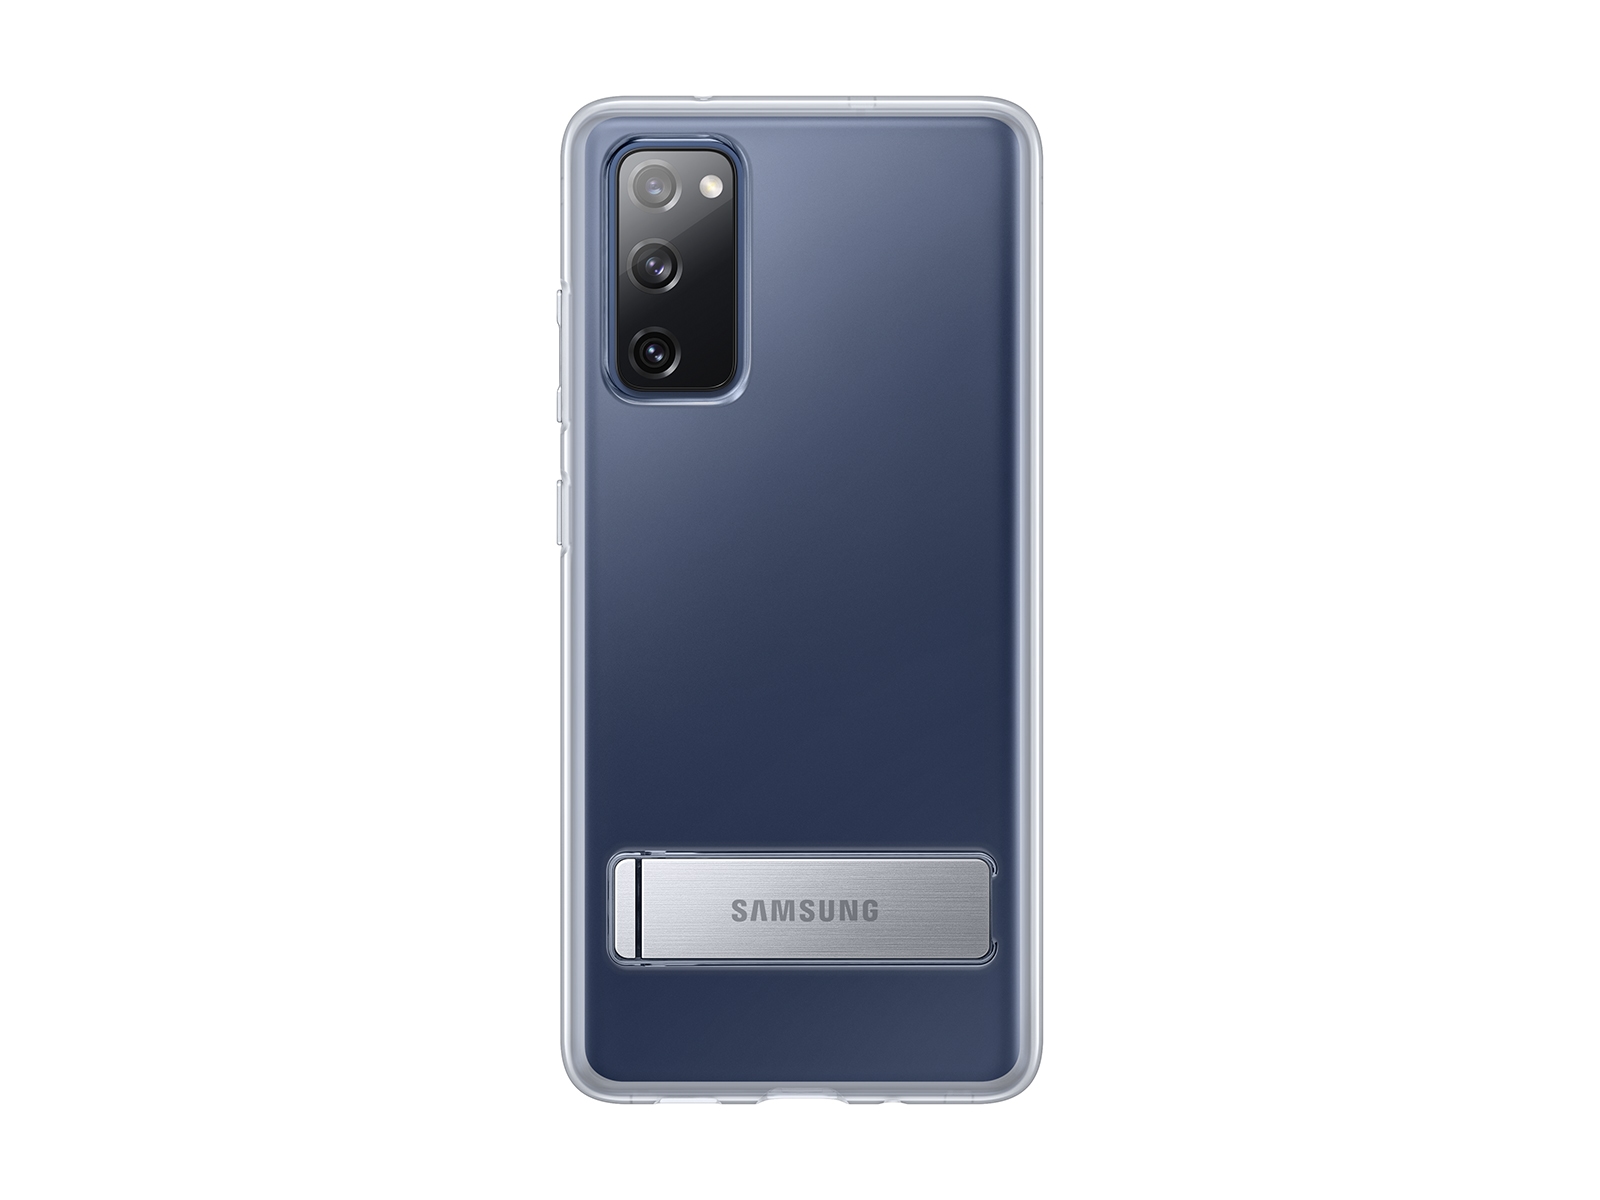 Samsung Galaxy S20 FE 5G Images, Official Pictures, Photo Gallery